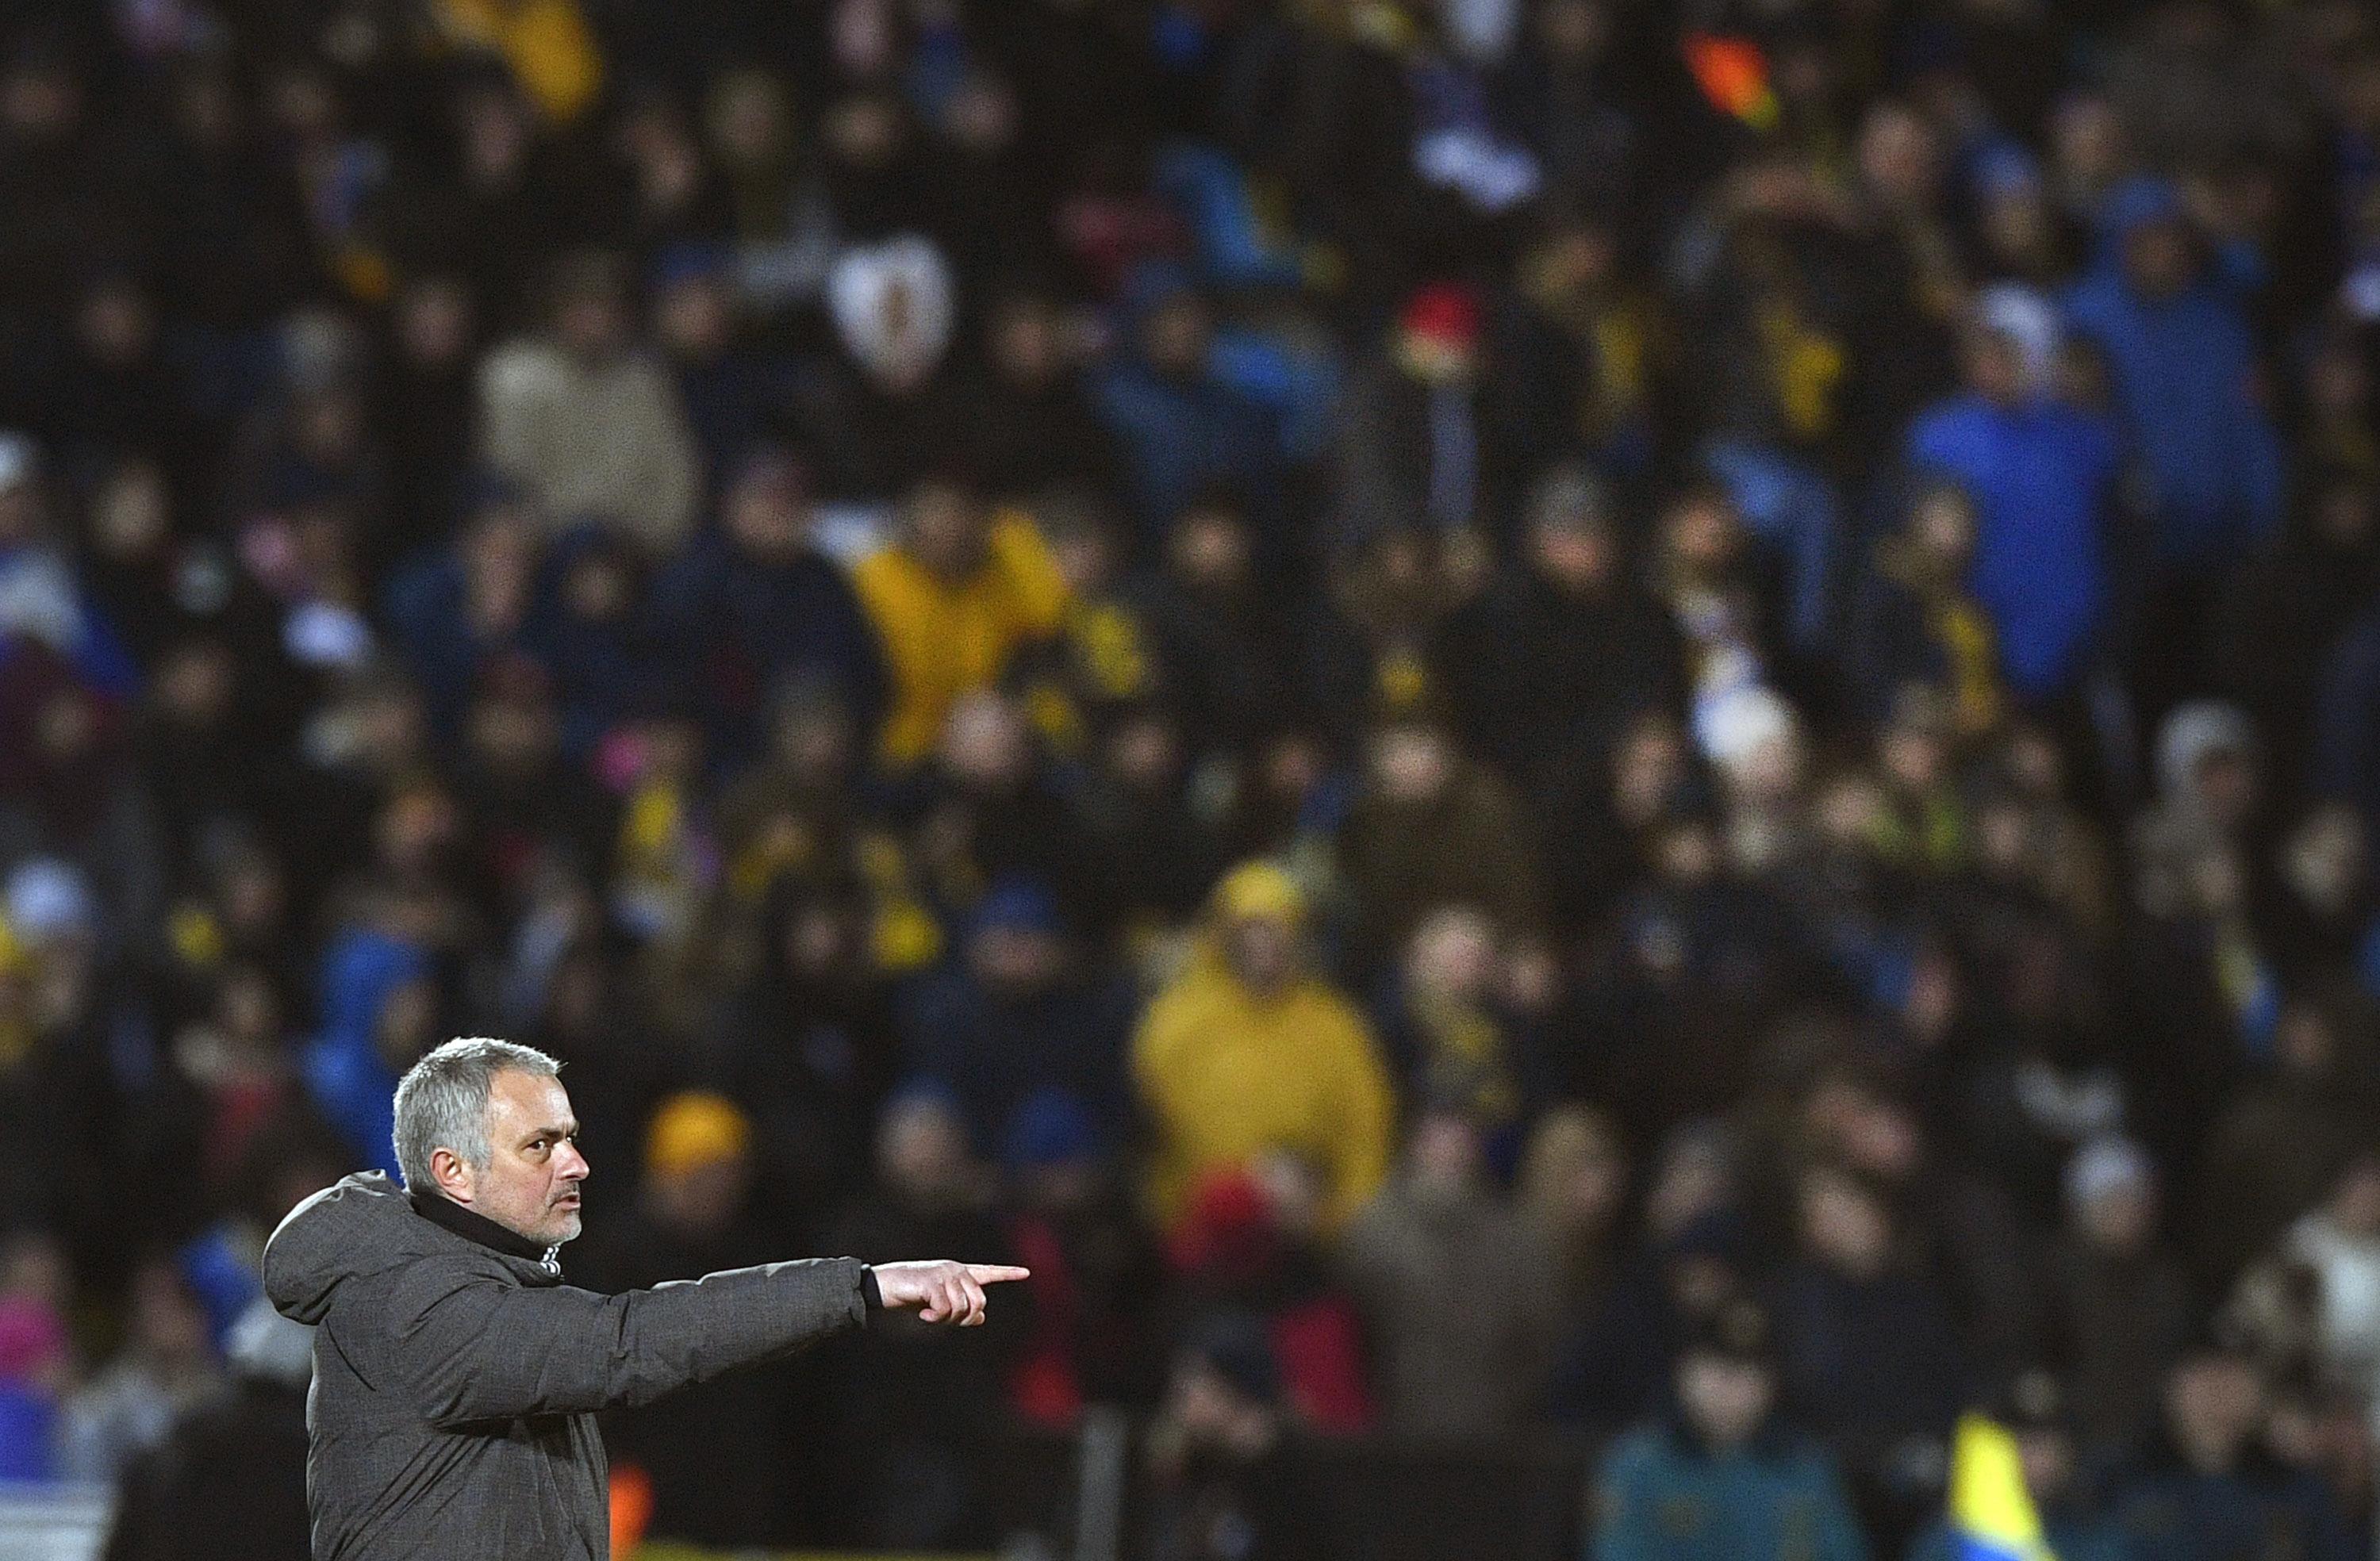 Manchester United's Portuguese coach Jose Mourinho reacts during the UEFA Europa League round of 16 football match between Rostov and Manchester United at Olimp-2 Arena in Rostov-on-Don on March 9, 2017. / AFP PHOTO / Alexander NEMENOV        (Photo credit should read ALEXANDER NEMENOV/AFP/Getty Images)